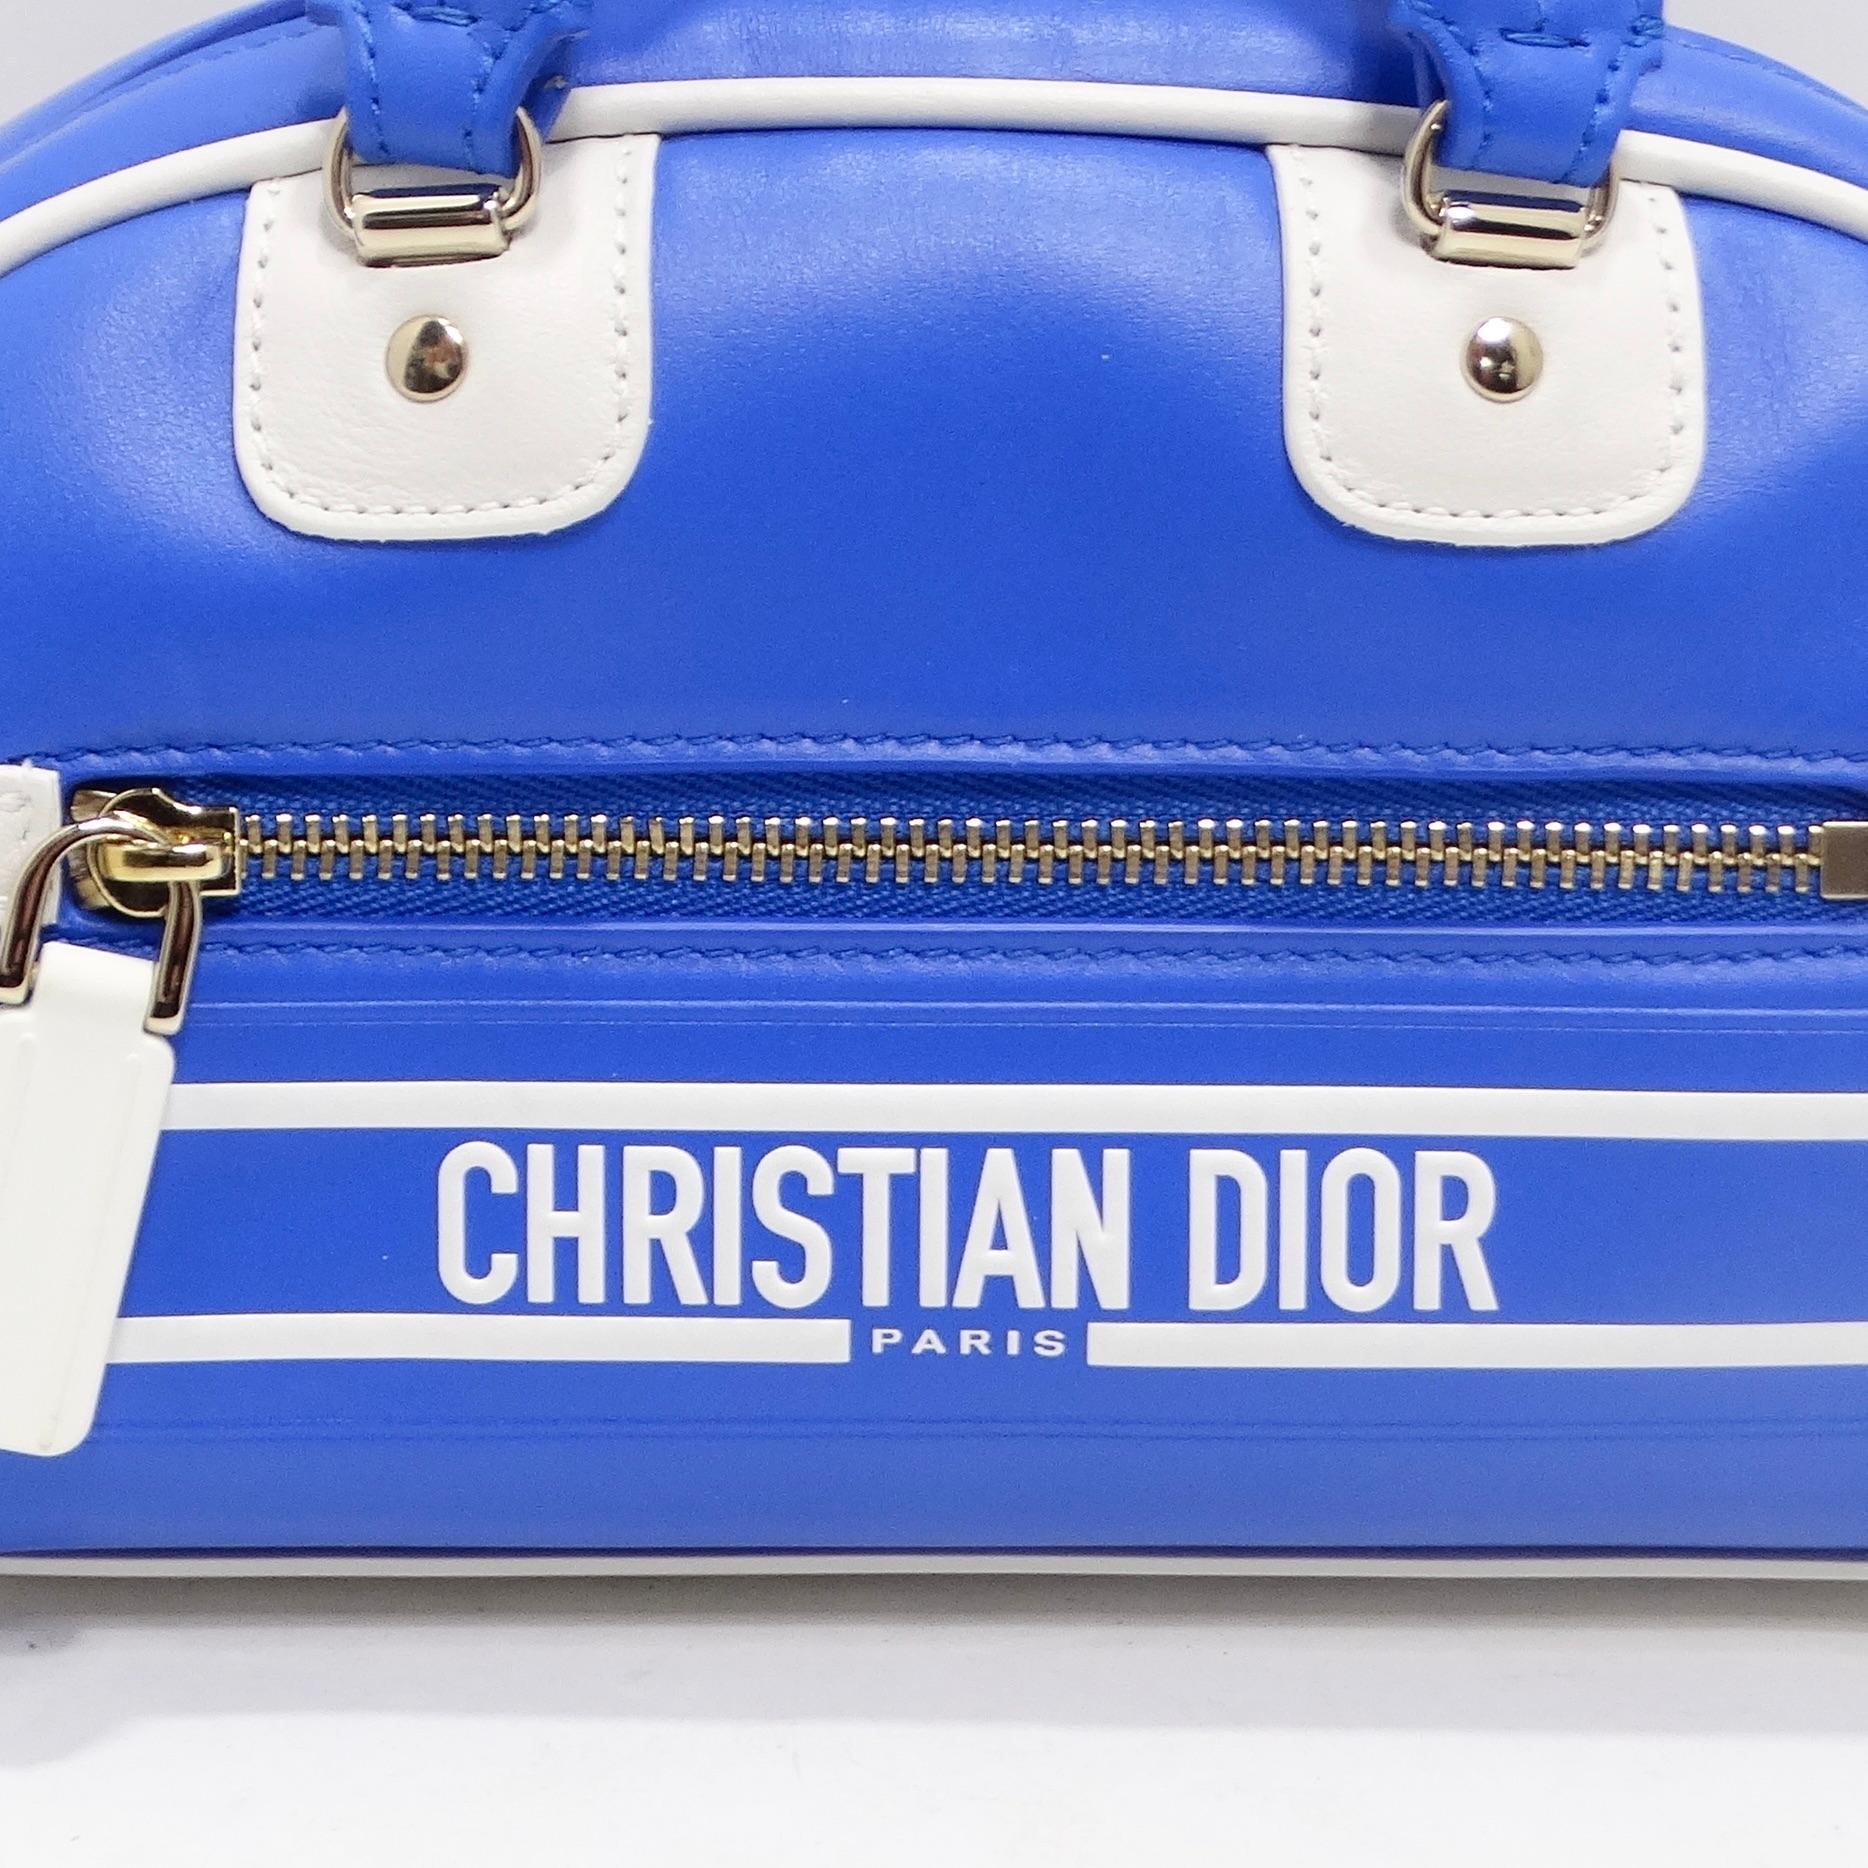 Introducing the Christian Dior Micro Vibe Zip Bowling Bag in Electric Blue Leather – a true embodiment of luxury and sportswear chic from the Summer 2022 fashion show. This micro-sized masterpiece showcases Maria Grazia Chiuri's couture spirit,